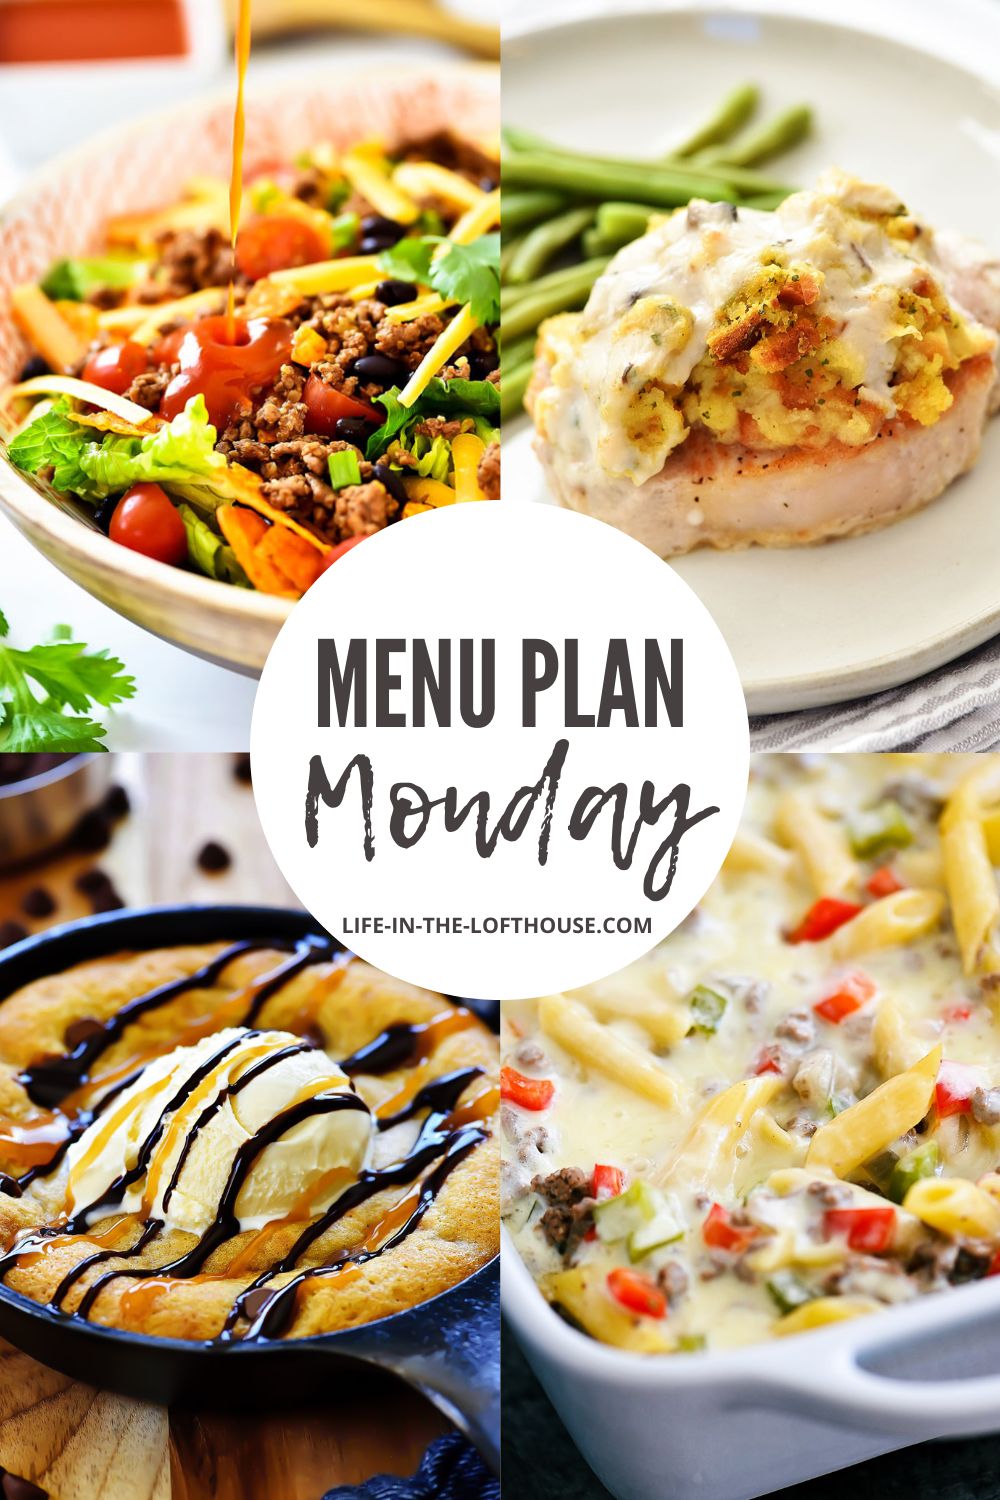 Menu Plan Monday is a list of six dinners and one dessert idea.